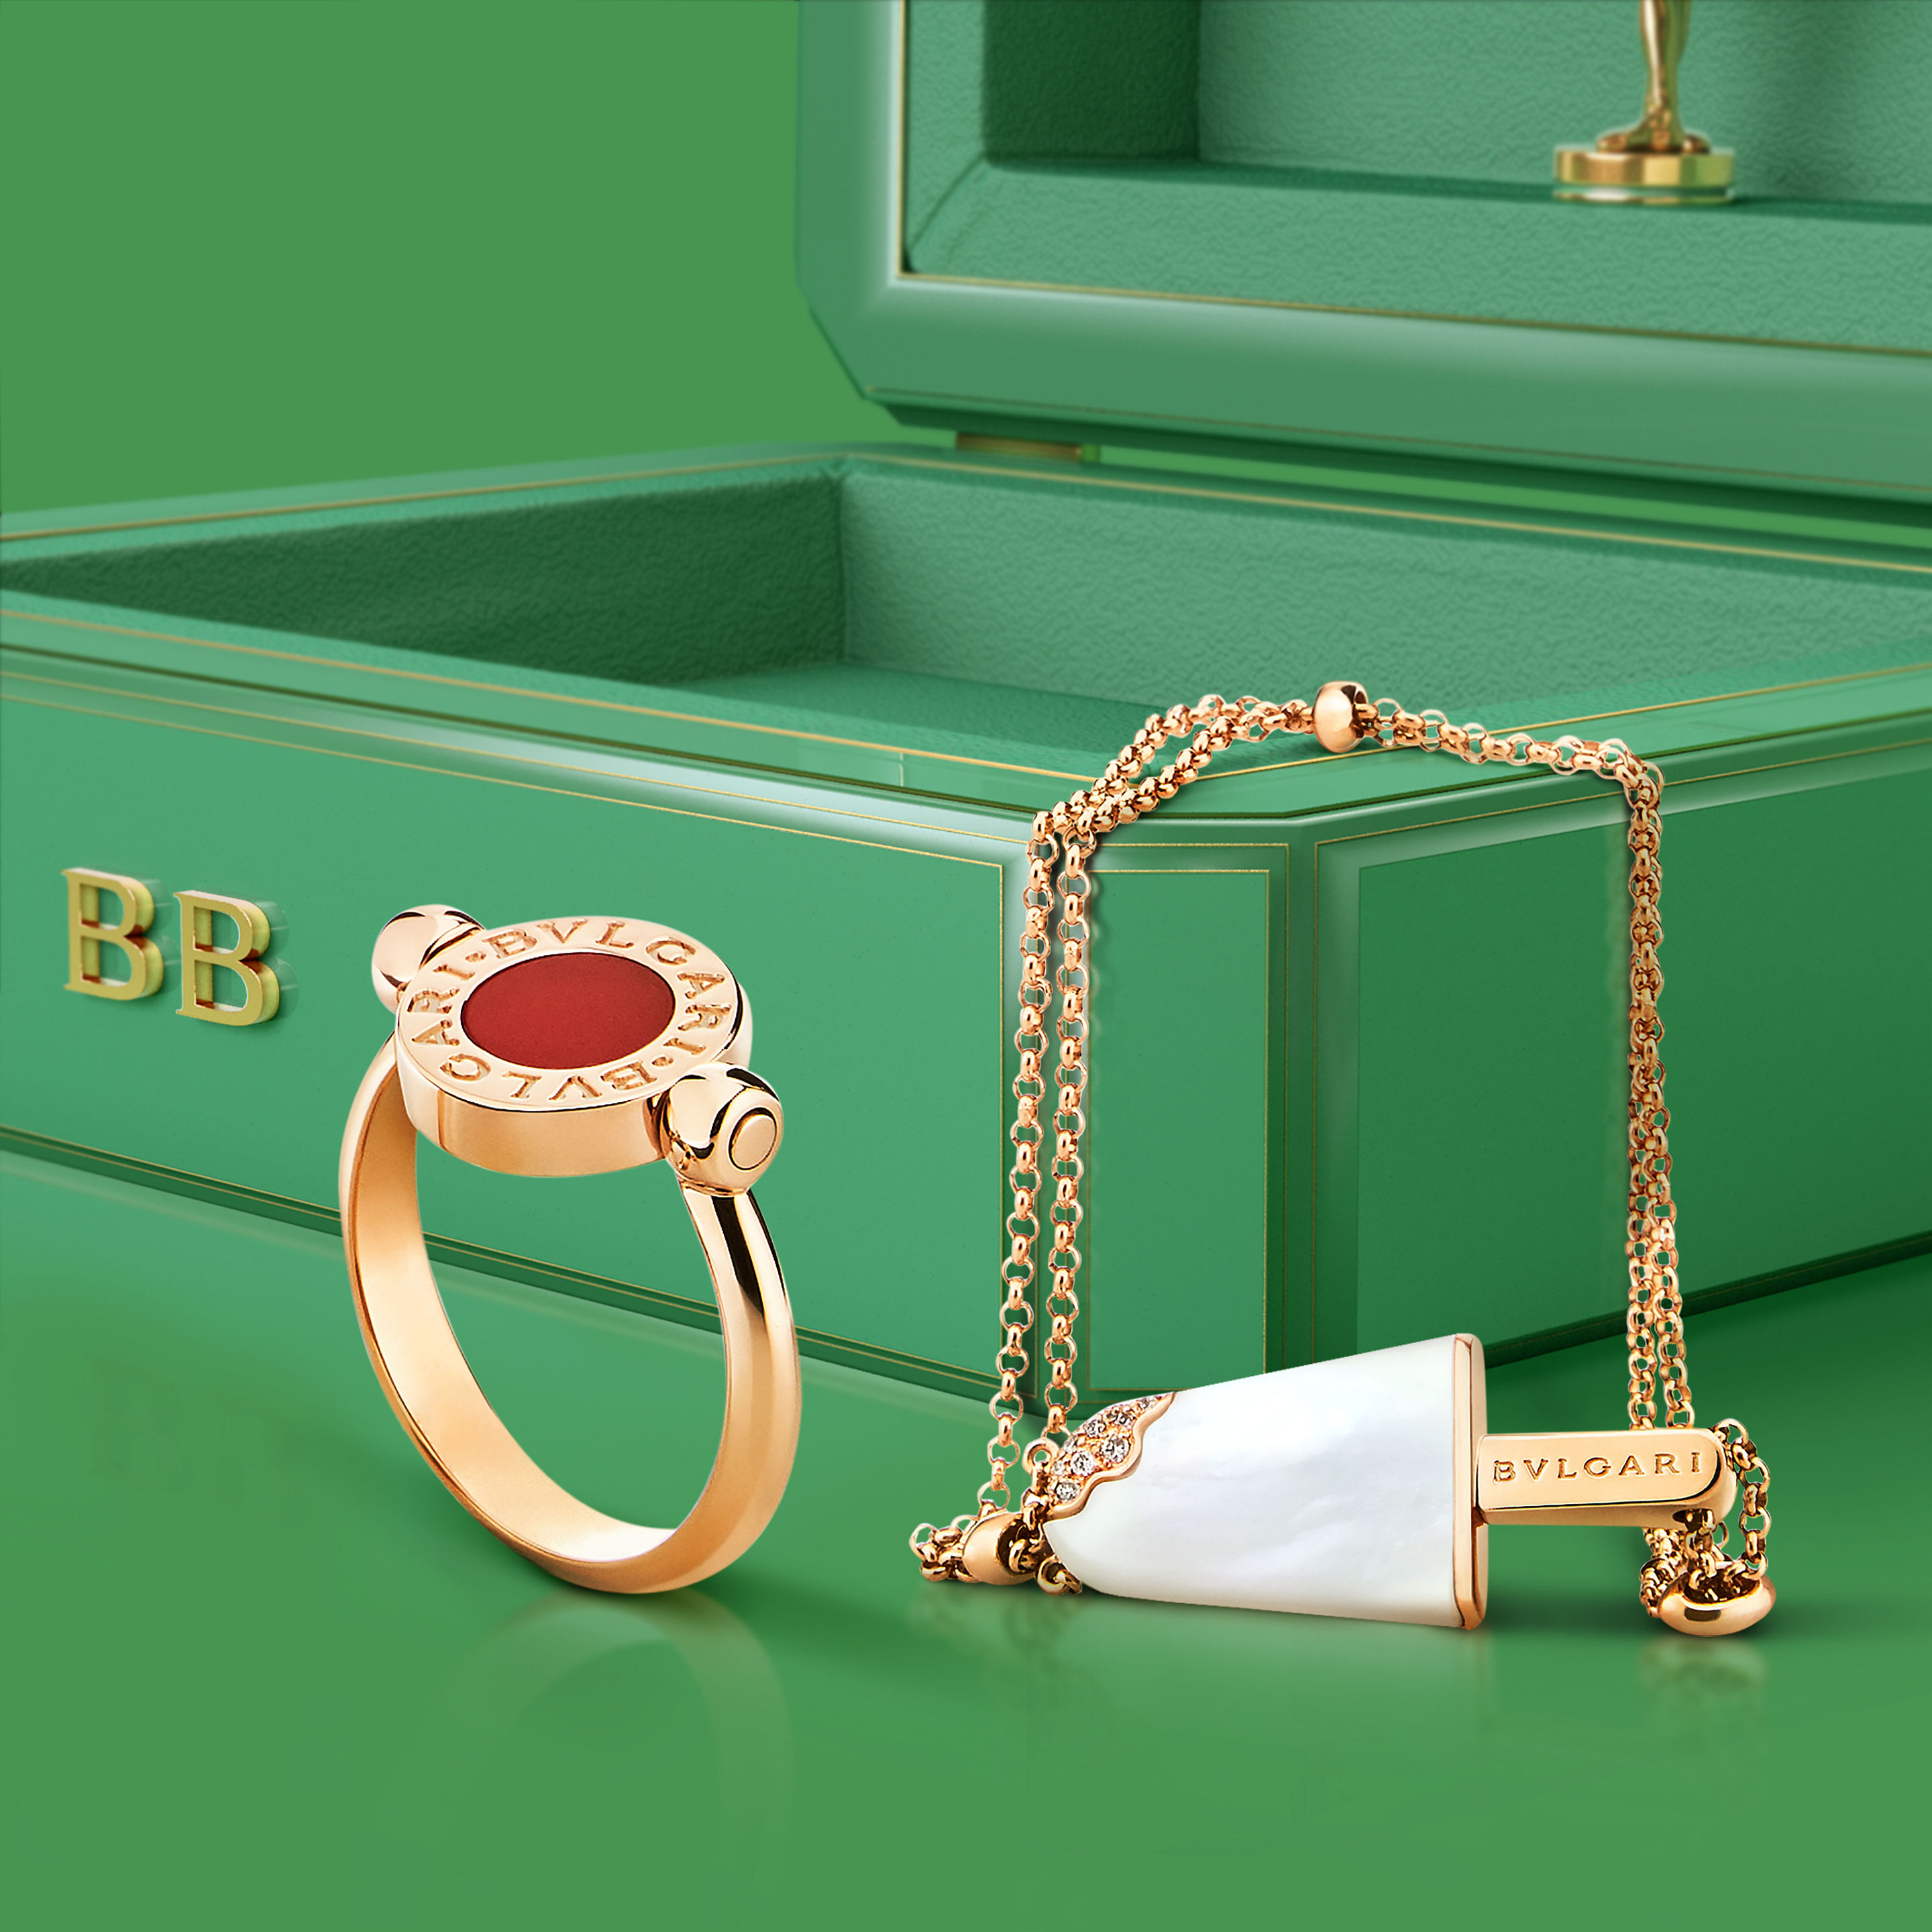 how much does a bvlgari ring cost in singapore